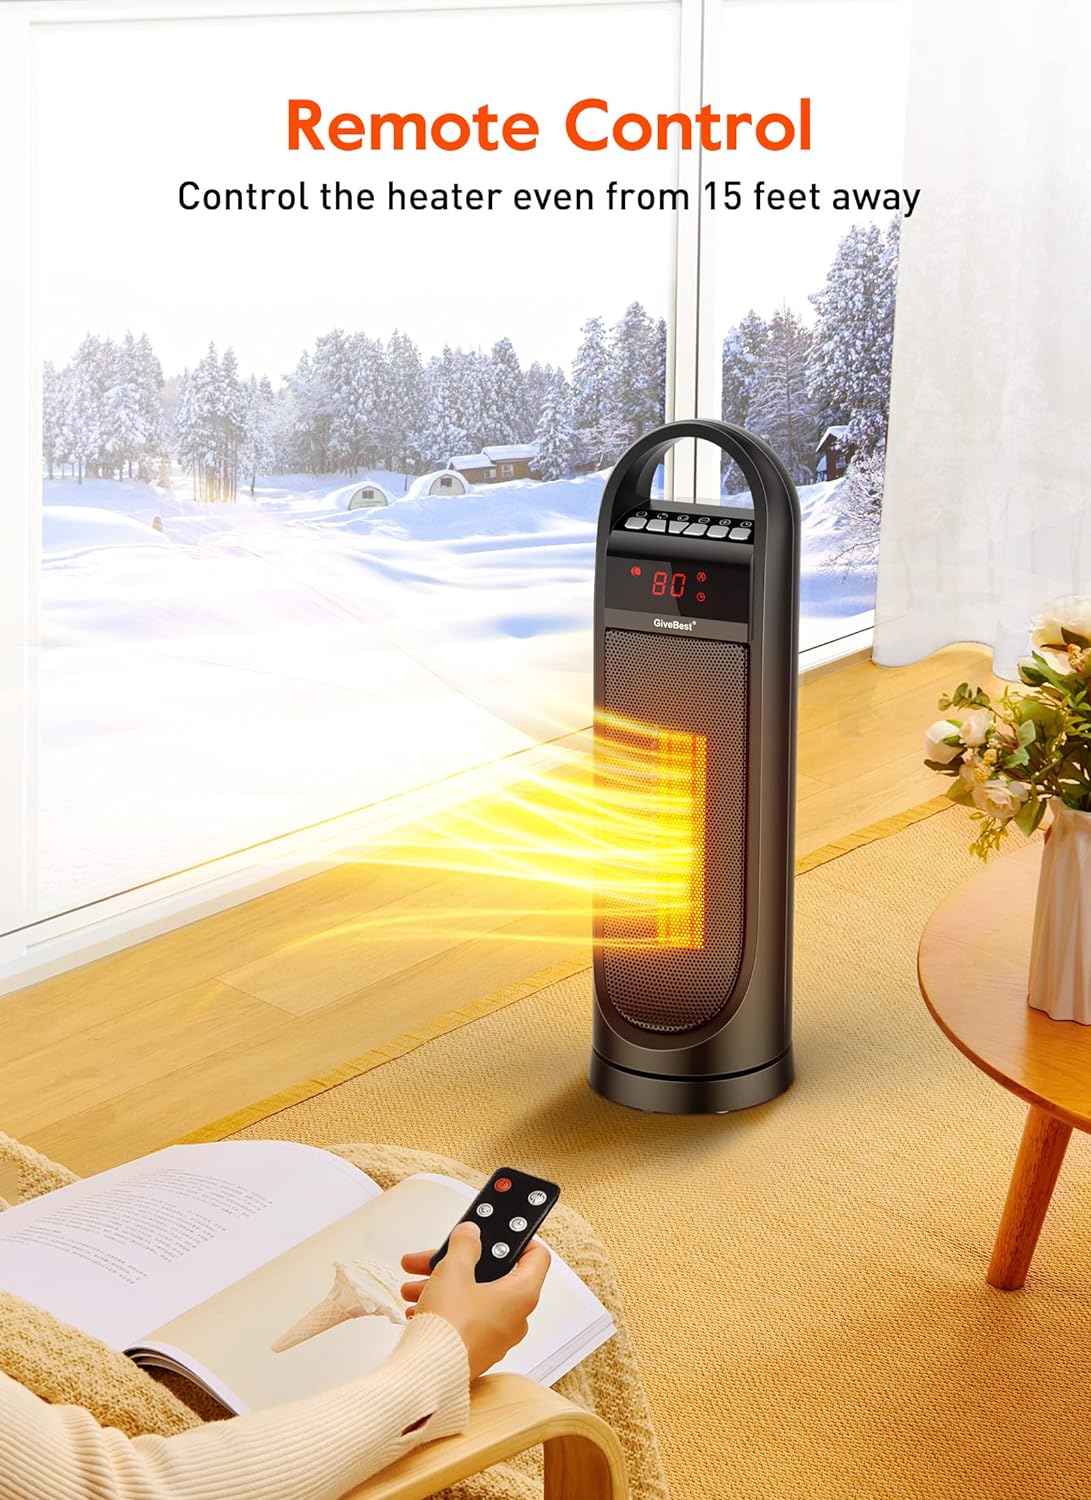 Portable Space Heater, Ceramic Quiet Heater 1500W/900W with Remote Control Built-in Timer, Thermostat, Overheat Tip-Over Protection, Electric Rotating Heater for Room Home Office